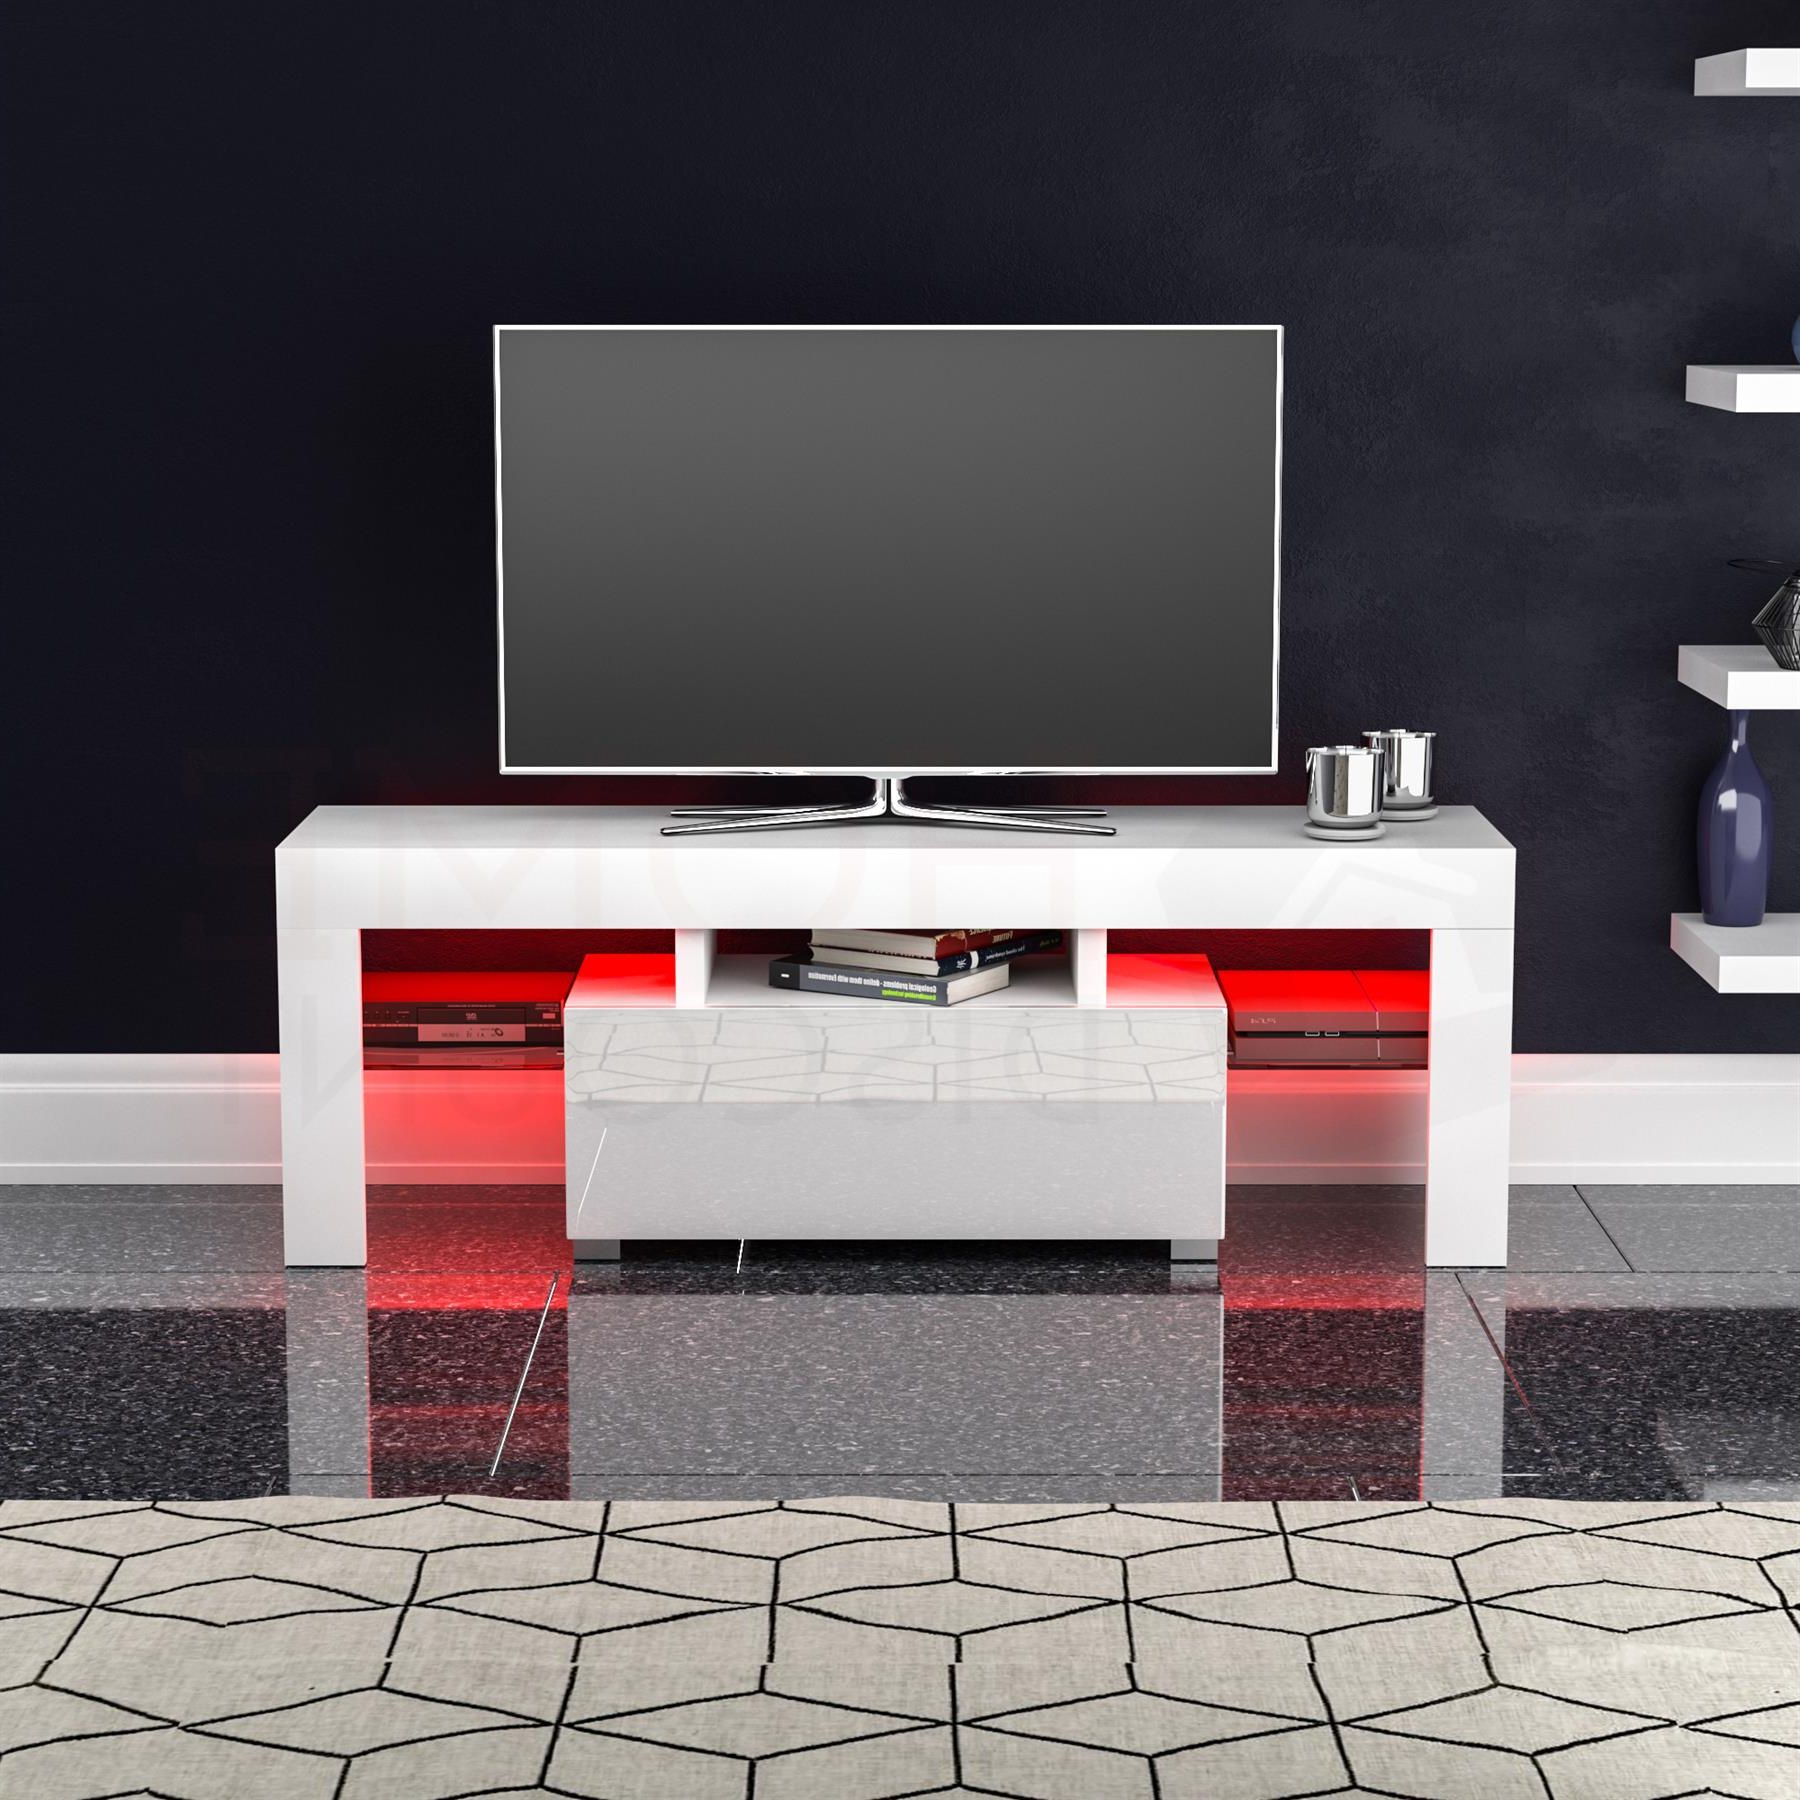 Luna Led Tv Stand Cabinet Unit 1 Drawer Modern Throughout Zimtown Modern Tv Stands High Gloss Media Console Cabinet With Led Shelf And Drawers (Gallery 10 of 20)